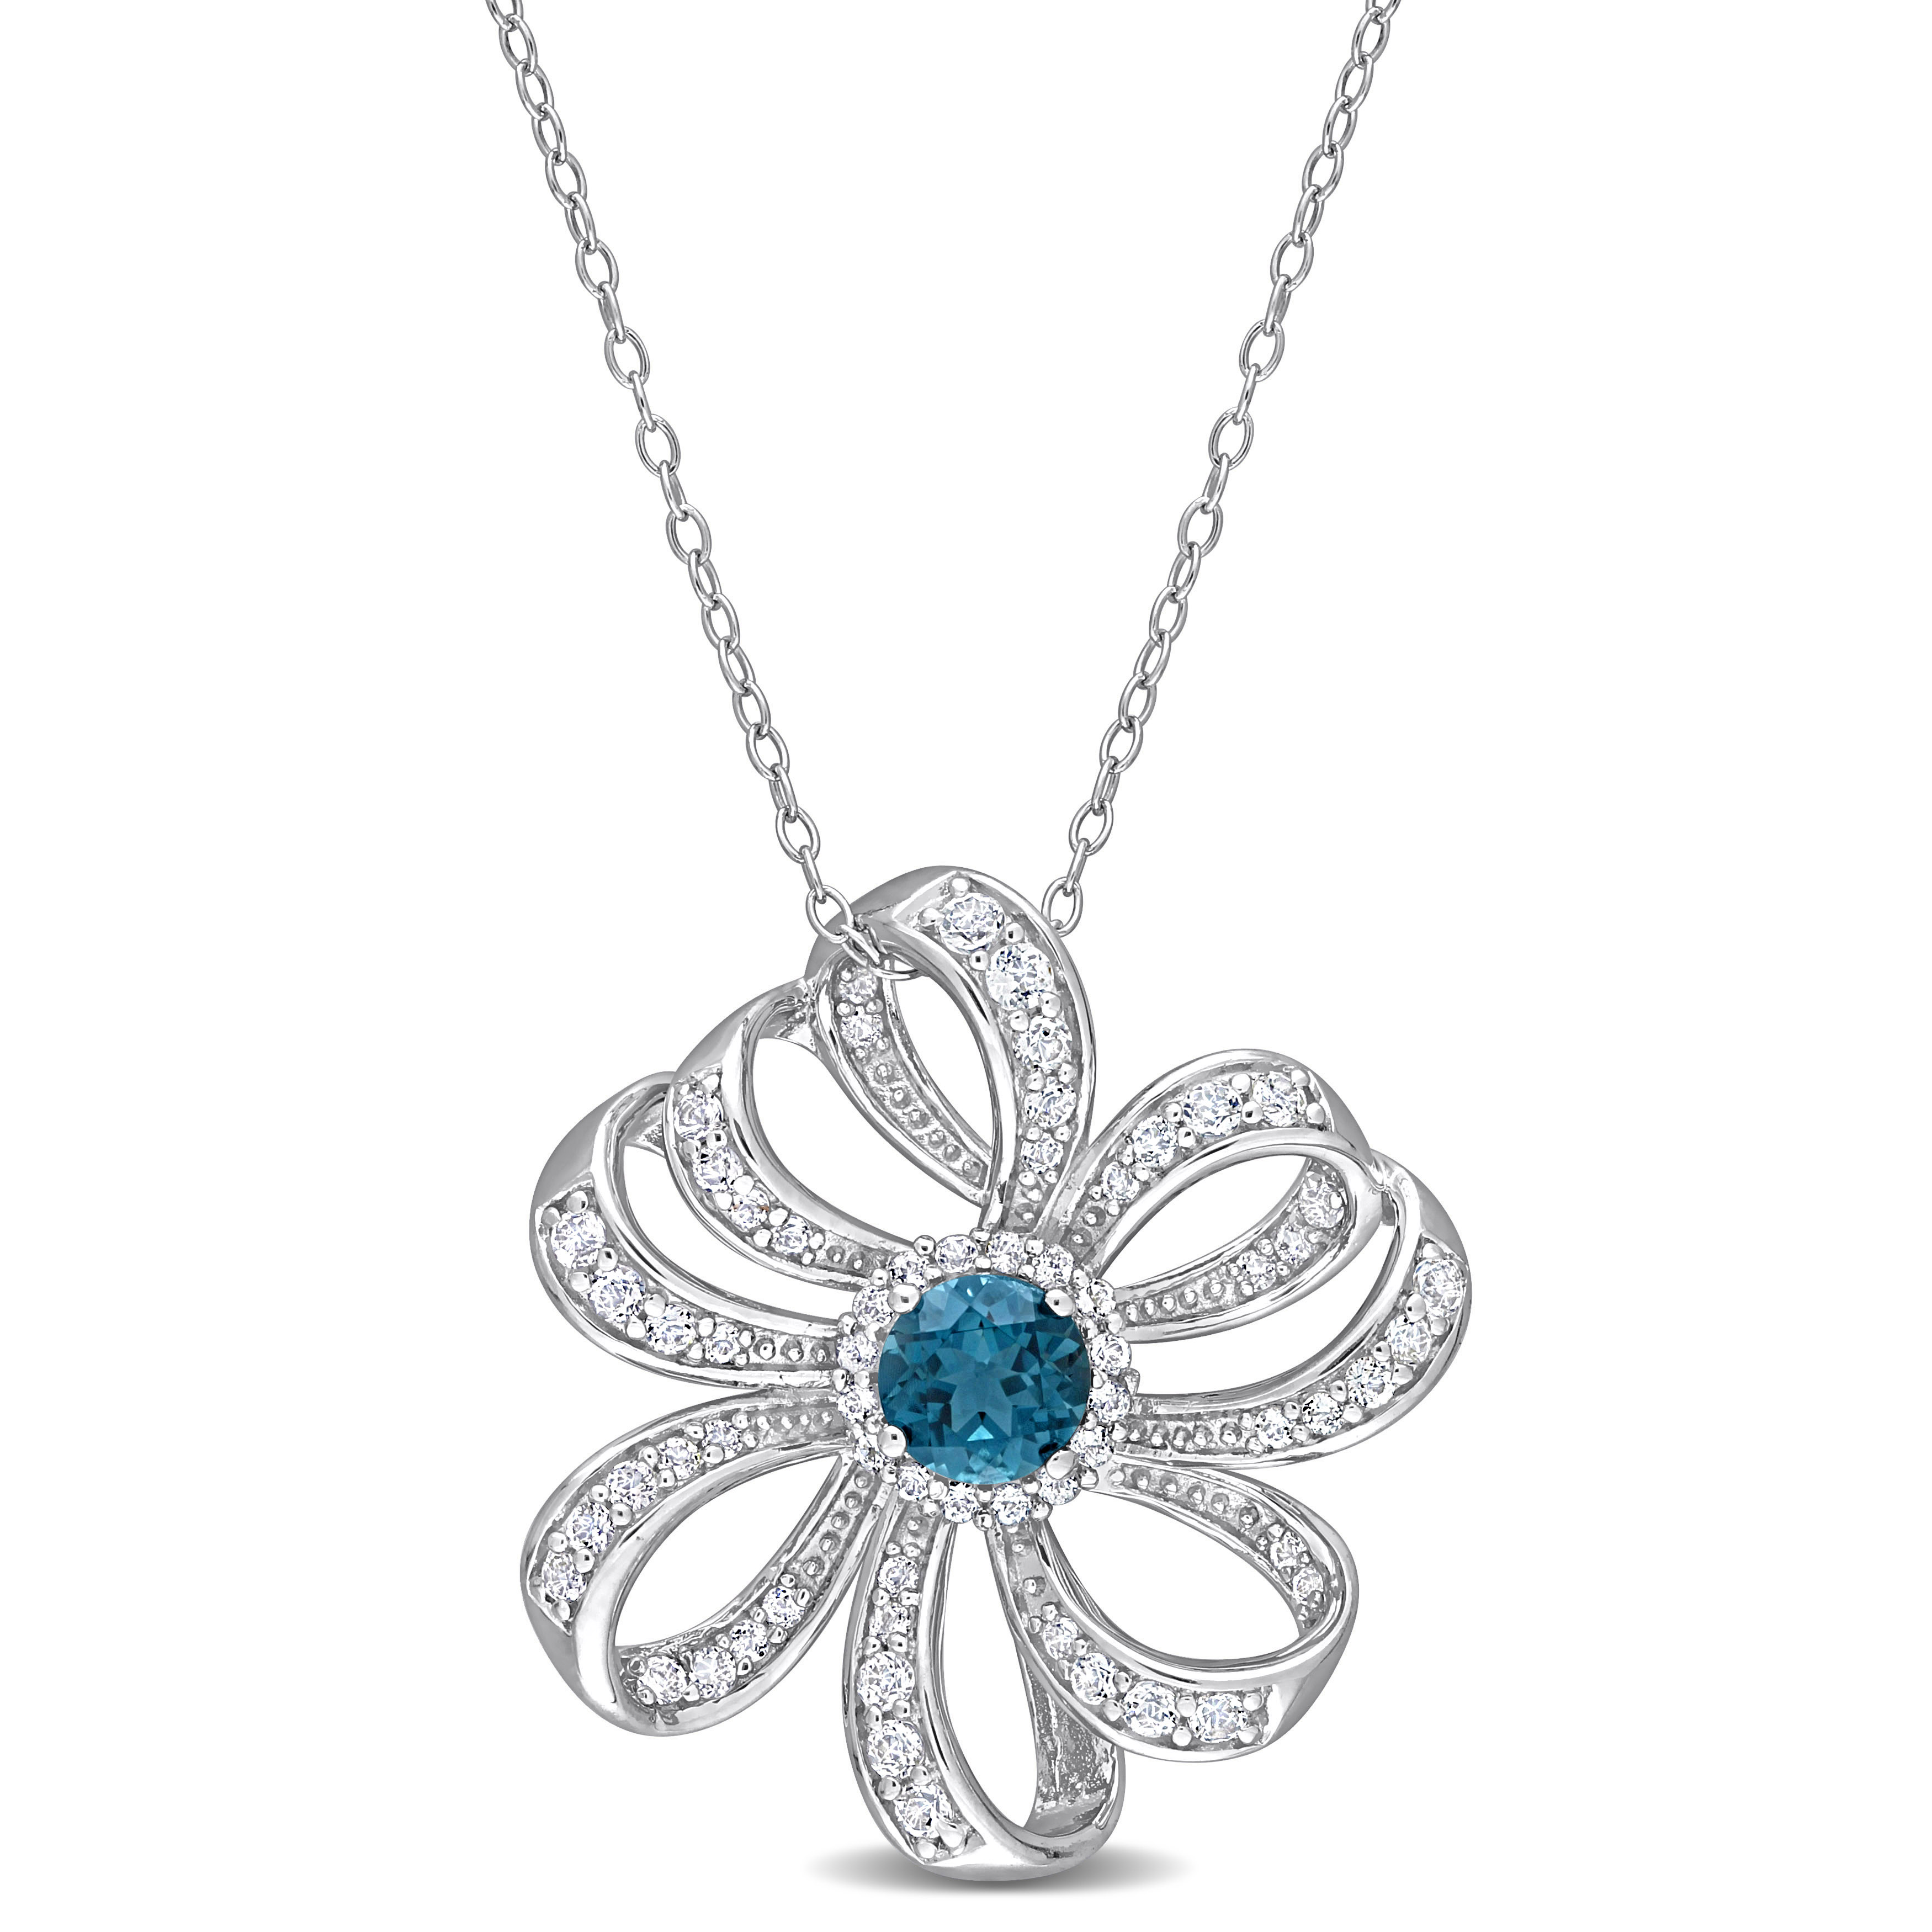 2 1/4 CT TGW London Blue Topaz and White Topaz Flower Pendant with Chain in Sterling Silver